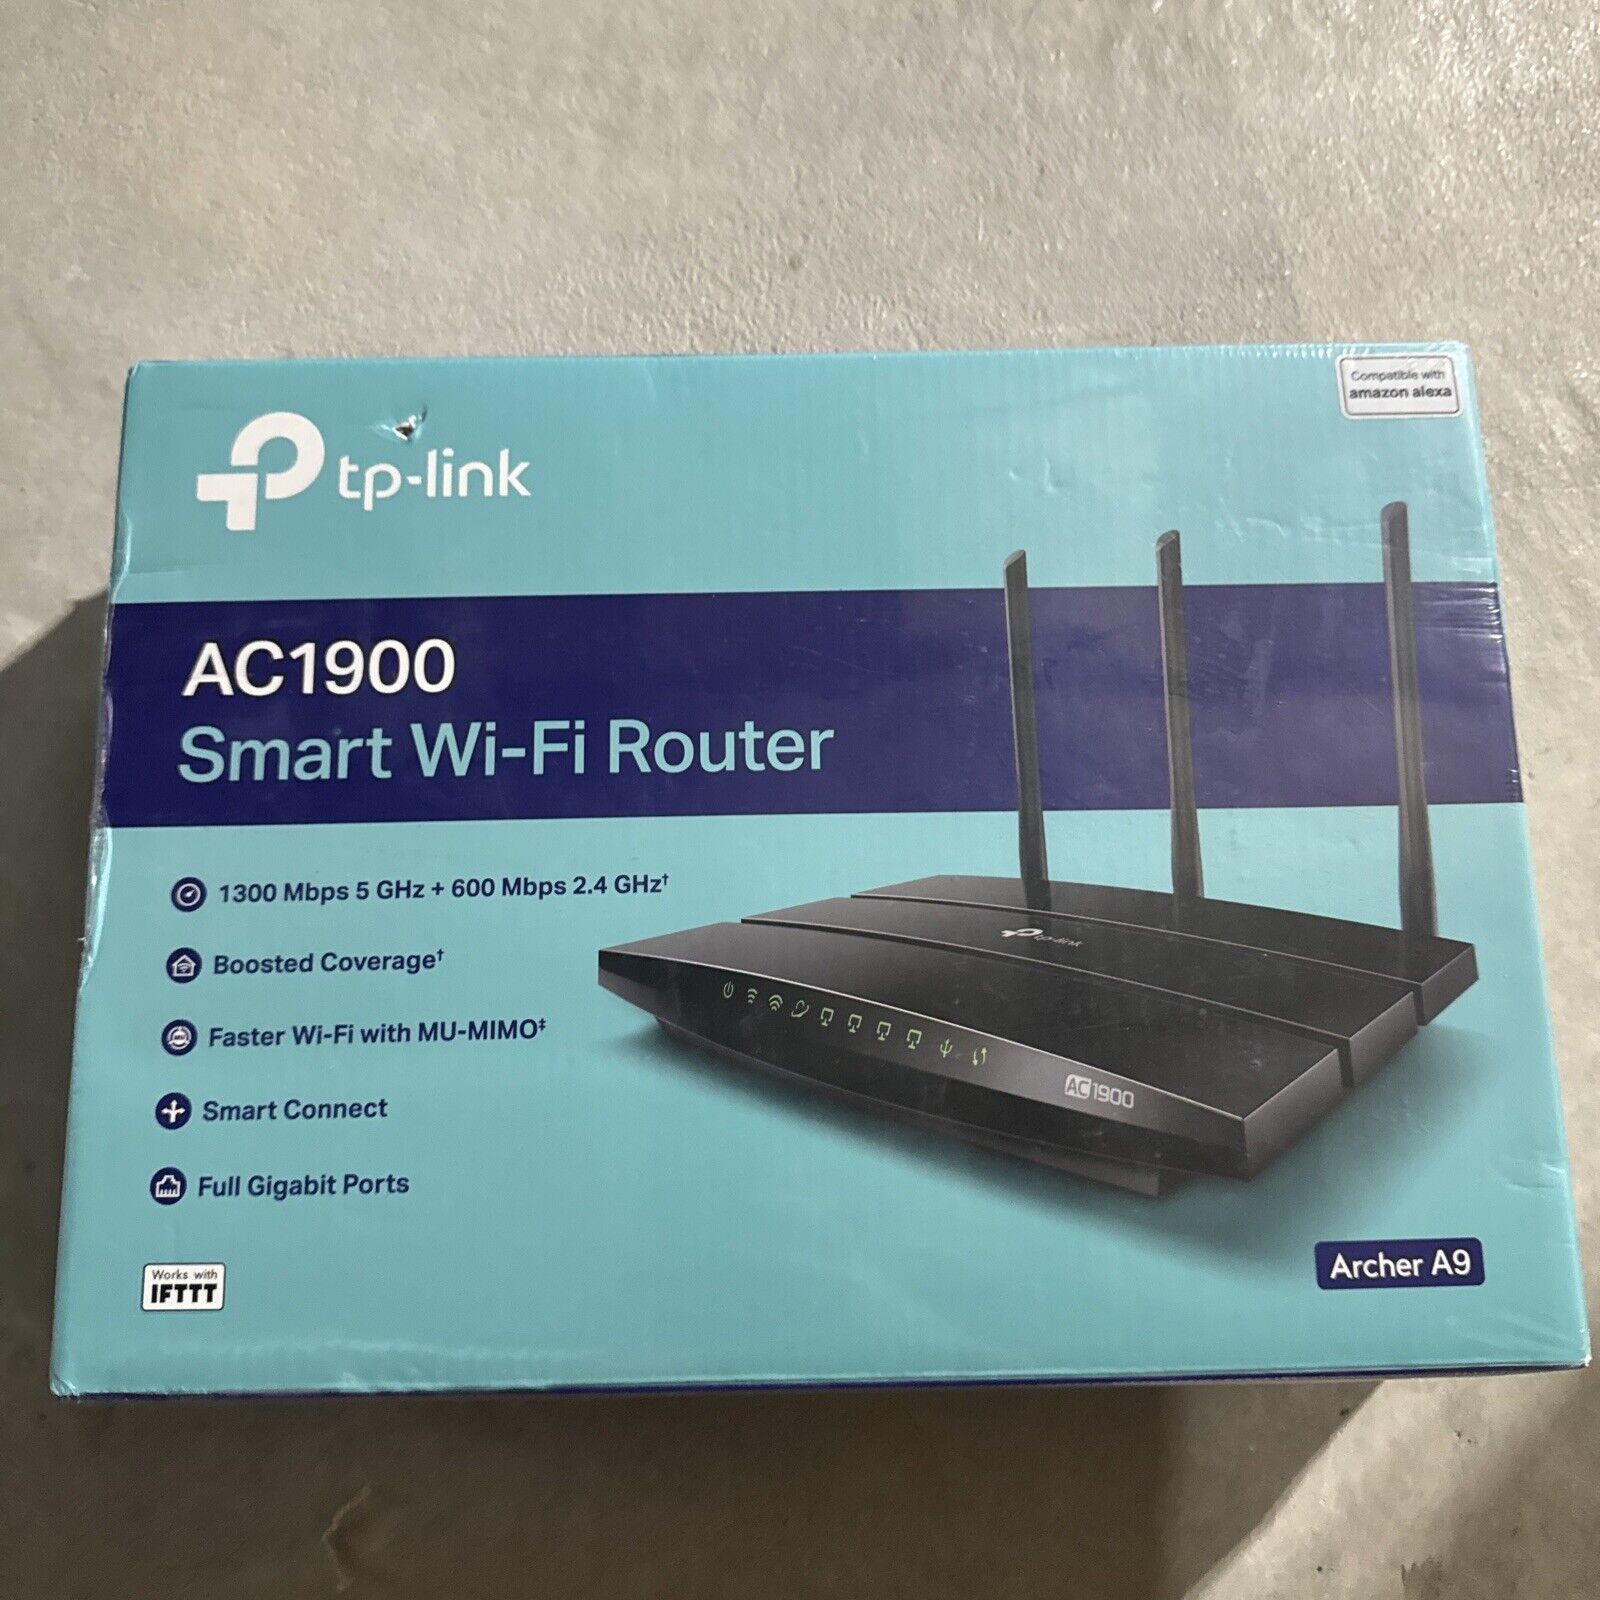 TP-Link Archer A9 AC1900 Dual-Band Mu-Mimo Wi-Fi Router with Gigabit Port